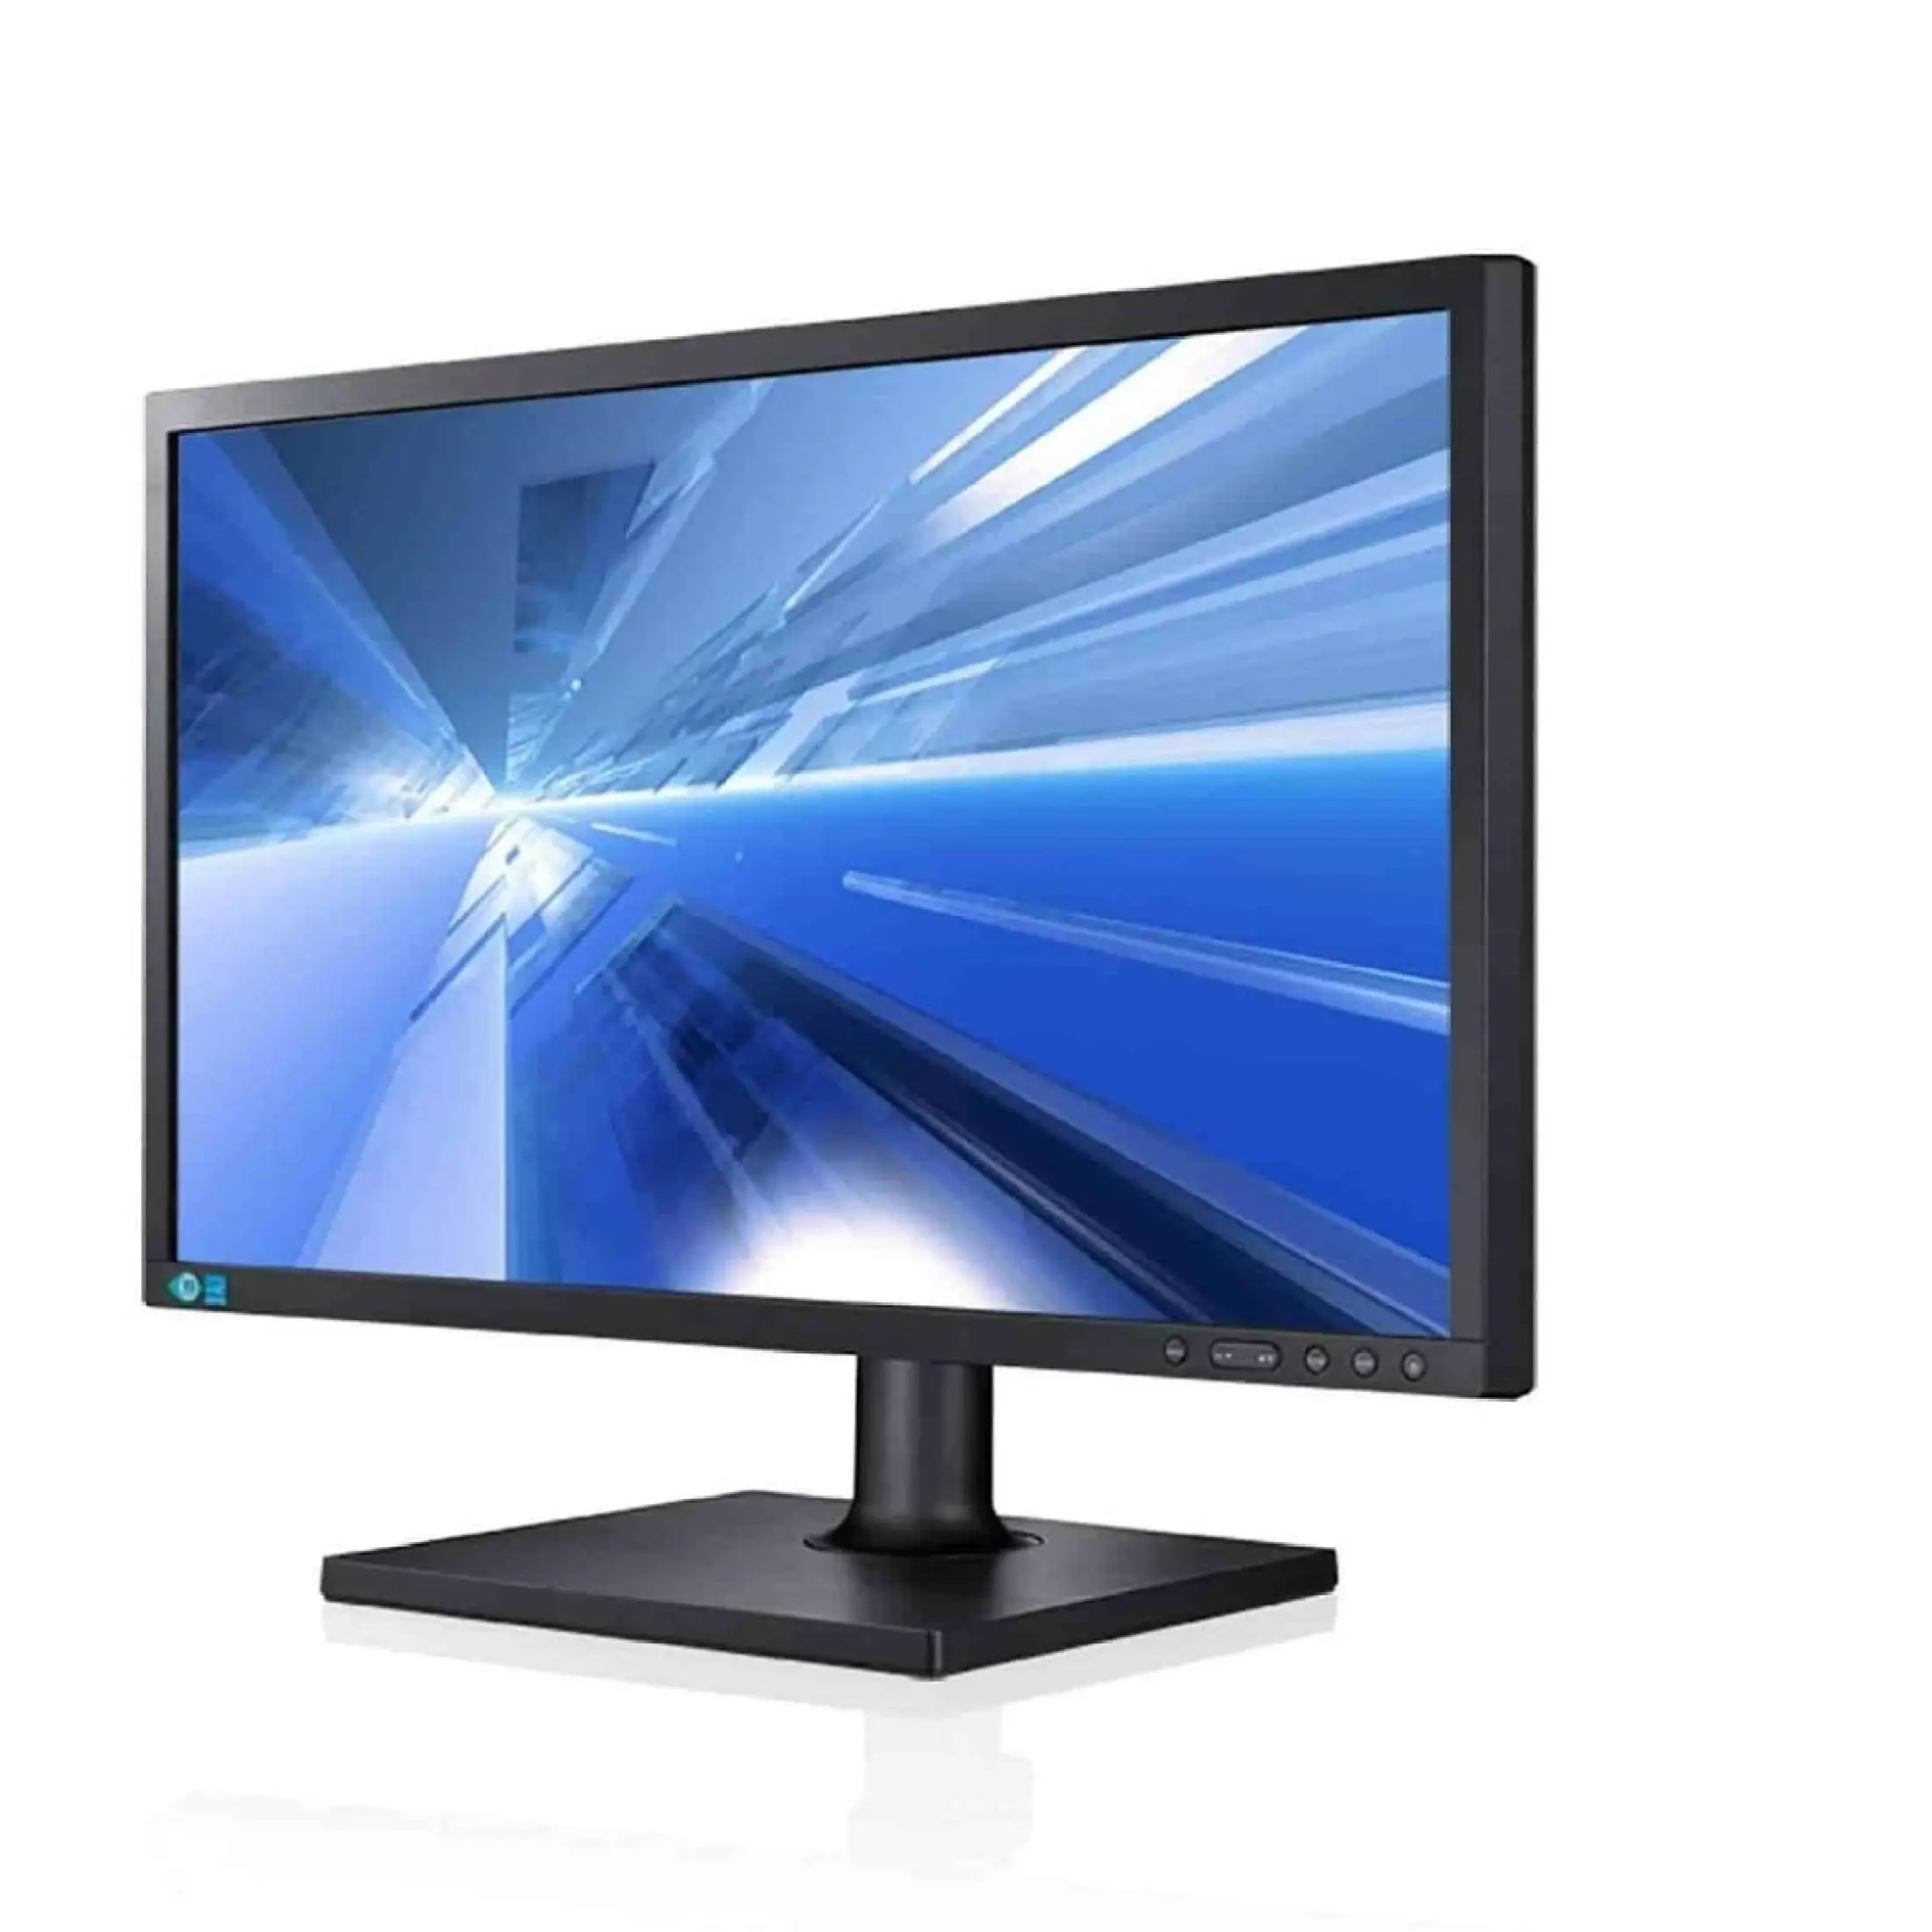 Certified Refurbished Samsung S22c450bw 22 Inch 1680 X 1050 Resolution Led Backlit Lcd Display Monitor Lazada Singapore